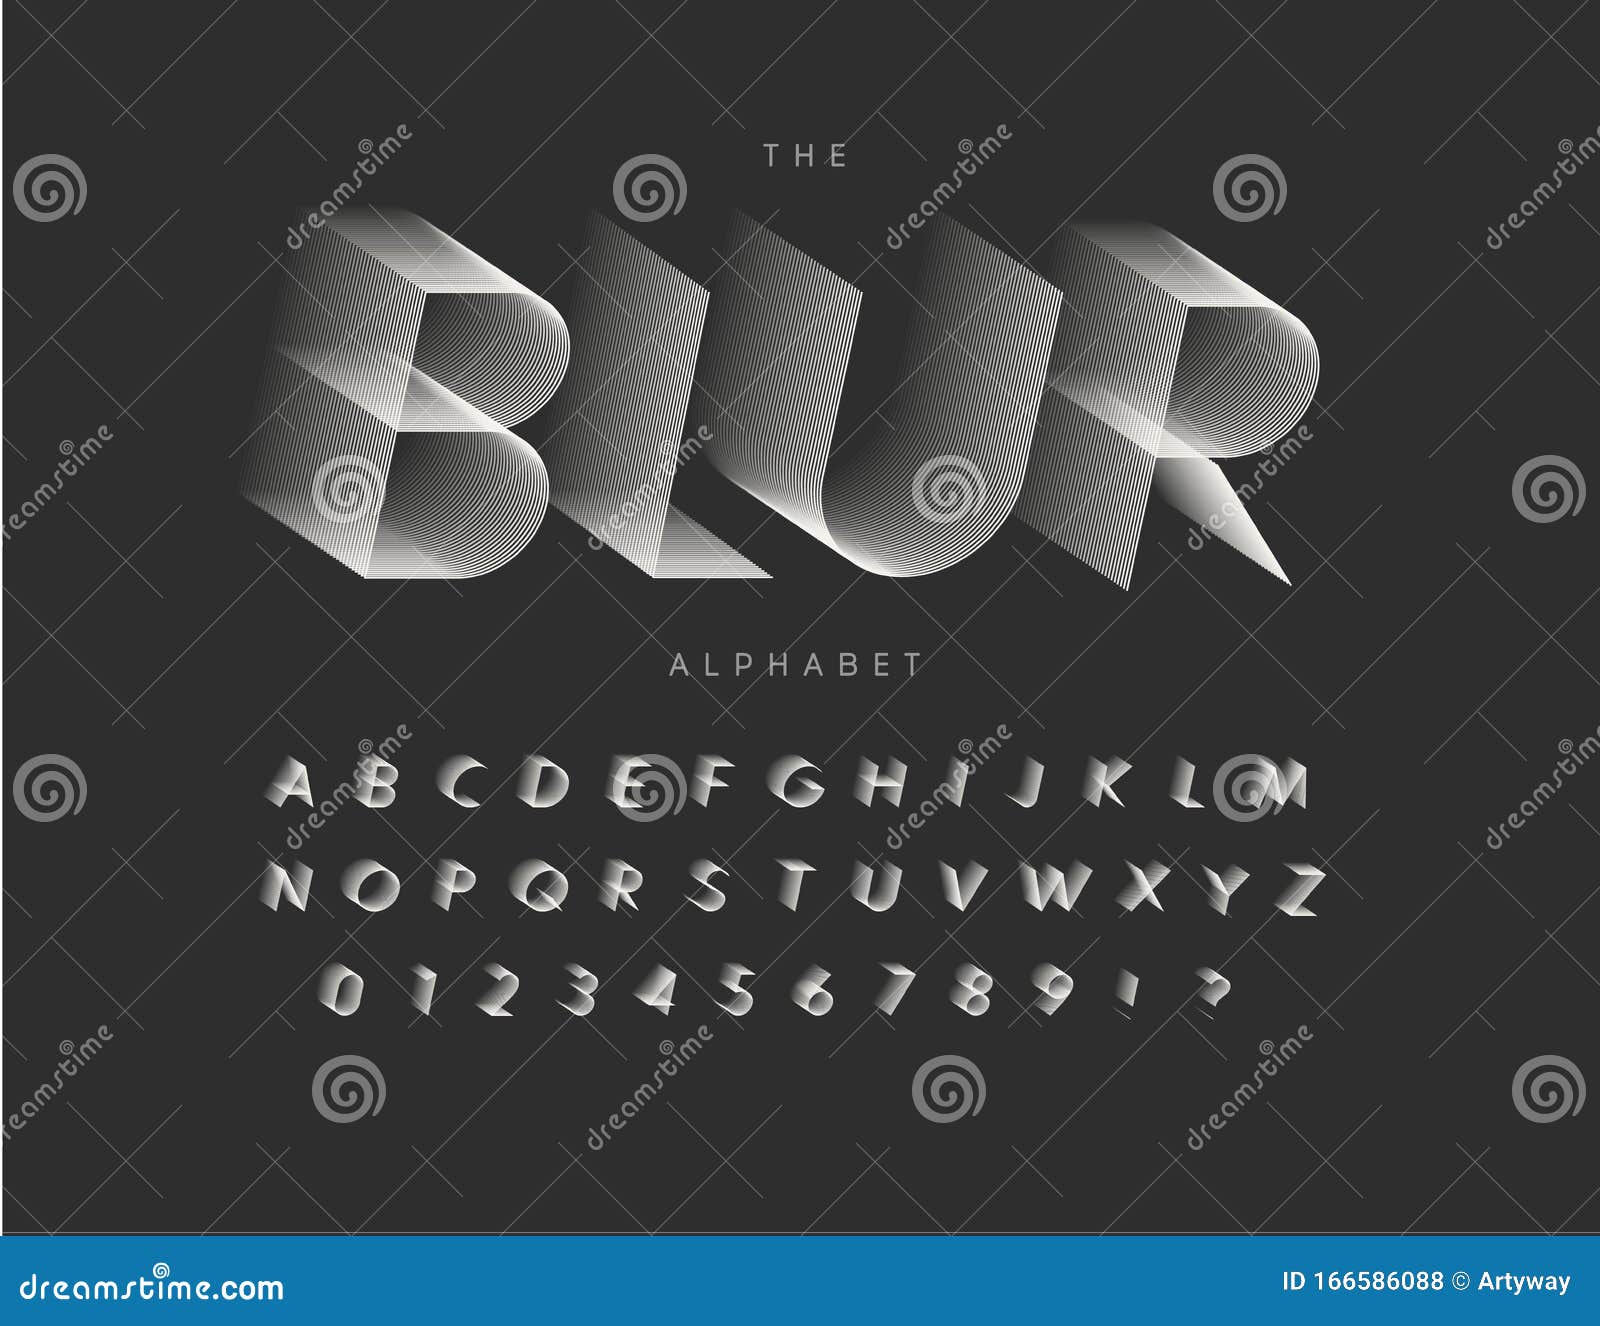 line blurring letters, numbers and signs set. wind style alphabet. font for events, promotions, logos, banner, monogram